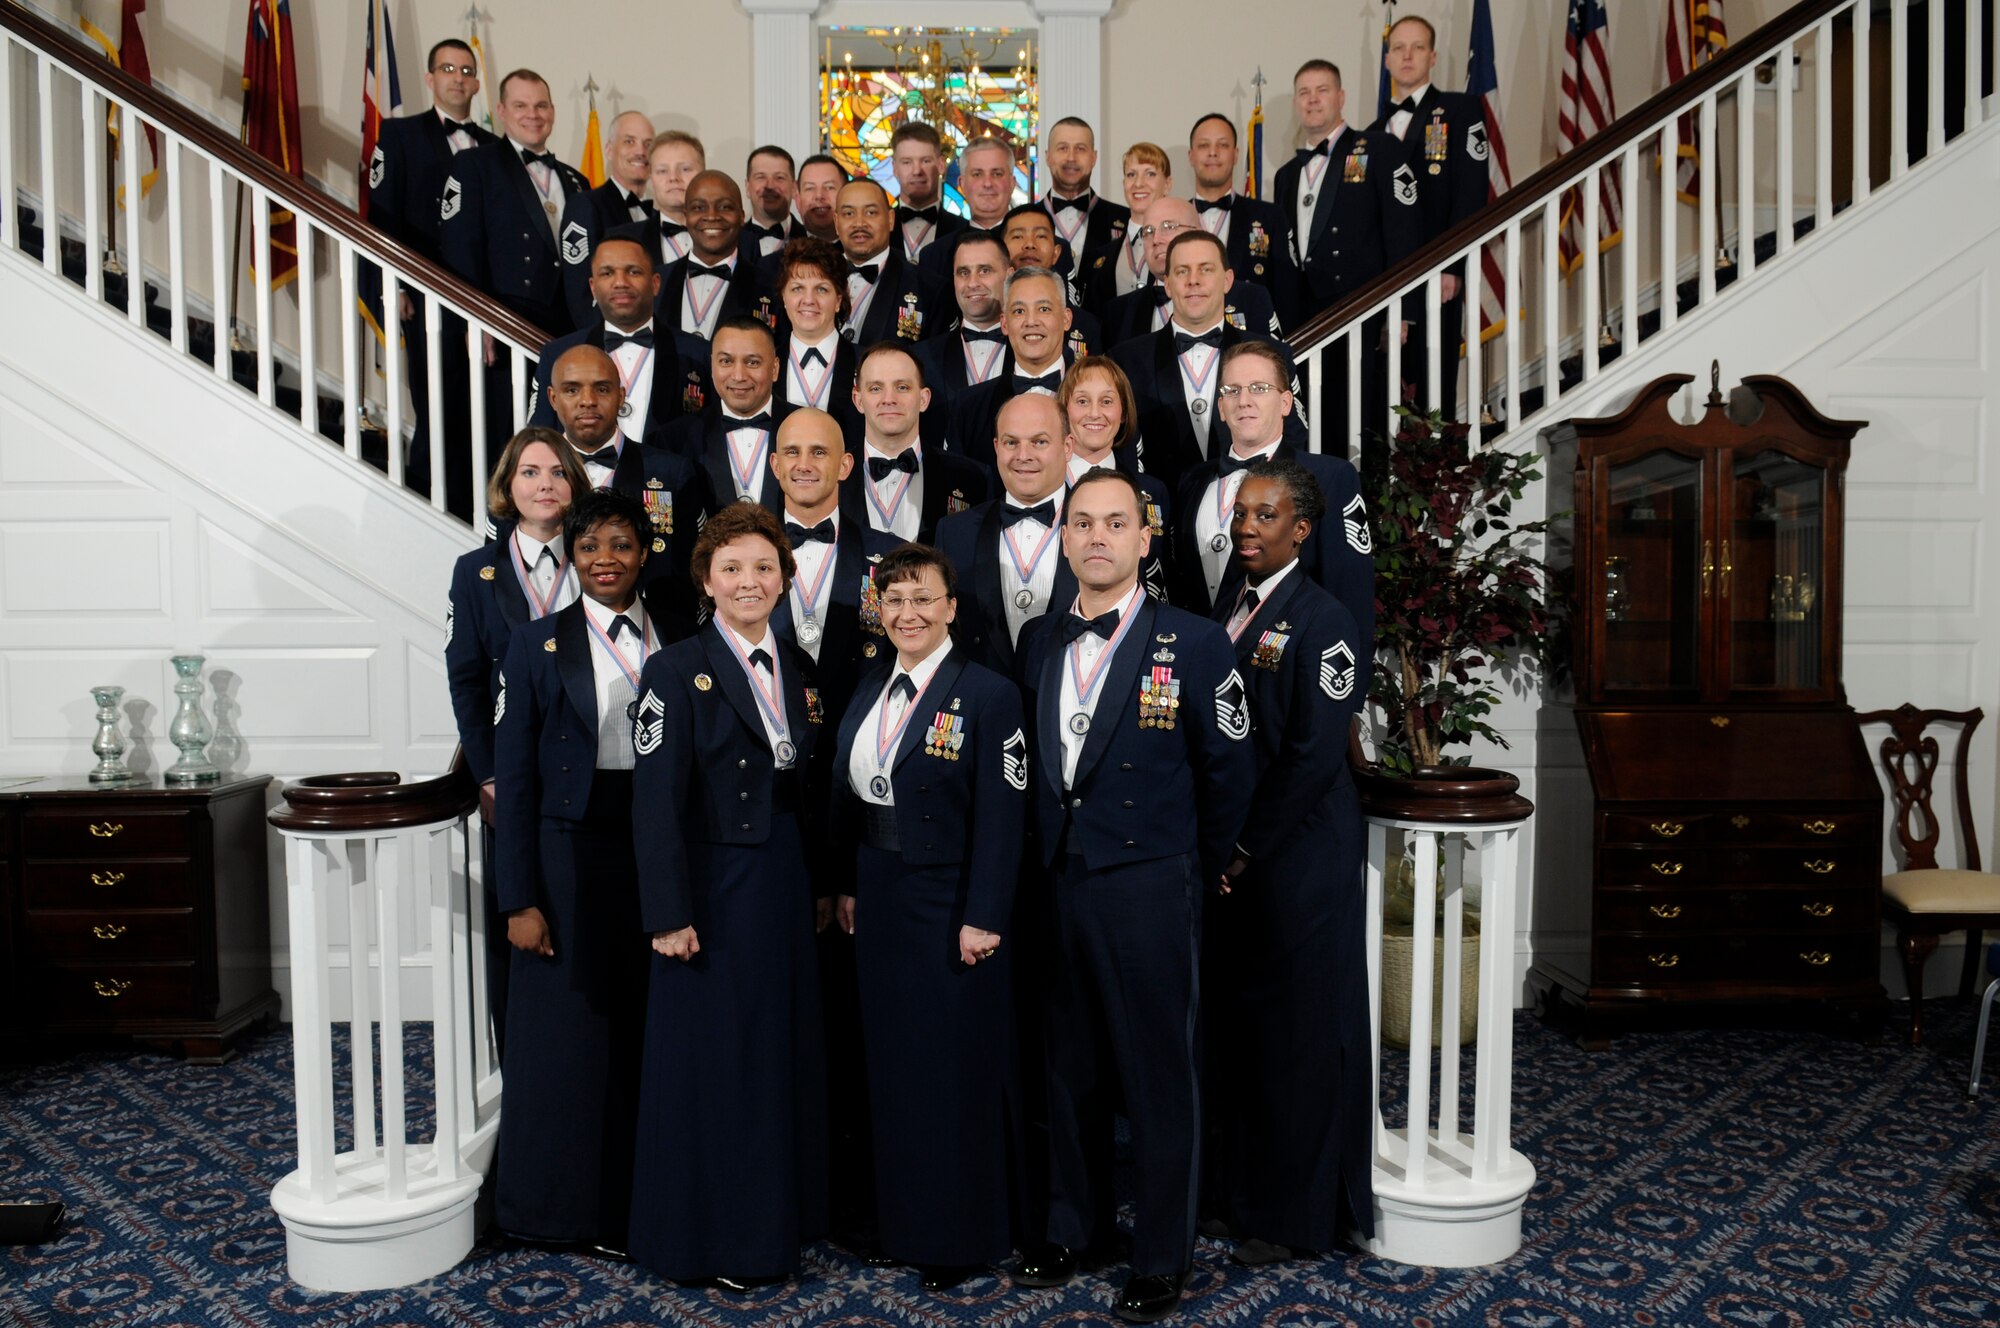 The 35 newest chief master sergeants from the Air Force District of Washington pose for a photo before the Chiefs Recognition ceremony in the Bolling Club Feb. 21. Recognized for their promotions were Angela Abshire, Chris Barnard, Andrew Barth, Kenneth Beyer, Philip Brown III, Rhonda Buening, Glen Coleman, Thomas Cooper, Kelley Downey, Stephen Farrell, Terry Foster, Miranda Garza, Tundra Gatewood, Larry Gruzs, Michelle Hentschel, Franchot Hicks, William Jackson, John Kubik, Stephen Lebrun, Craig LeDoux, George Lytle, Onofre Martin Jr., David McKinney, Michael McQueeny, Ishraph Mohammad, Vicki Robinson, Francisco Rodriguez, Richard Simonsen, John Snow, Bradley Spilinek, Mark Stevenson, Greg Truglio, Bernice Van Dusen, Kurt Wachs, and George Wickizer. (U.S. Air Force photo by Staff Sgt. Dan DeCook)
